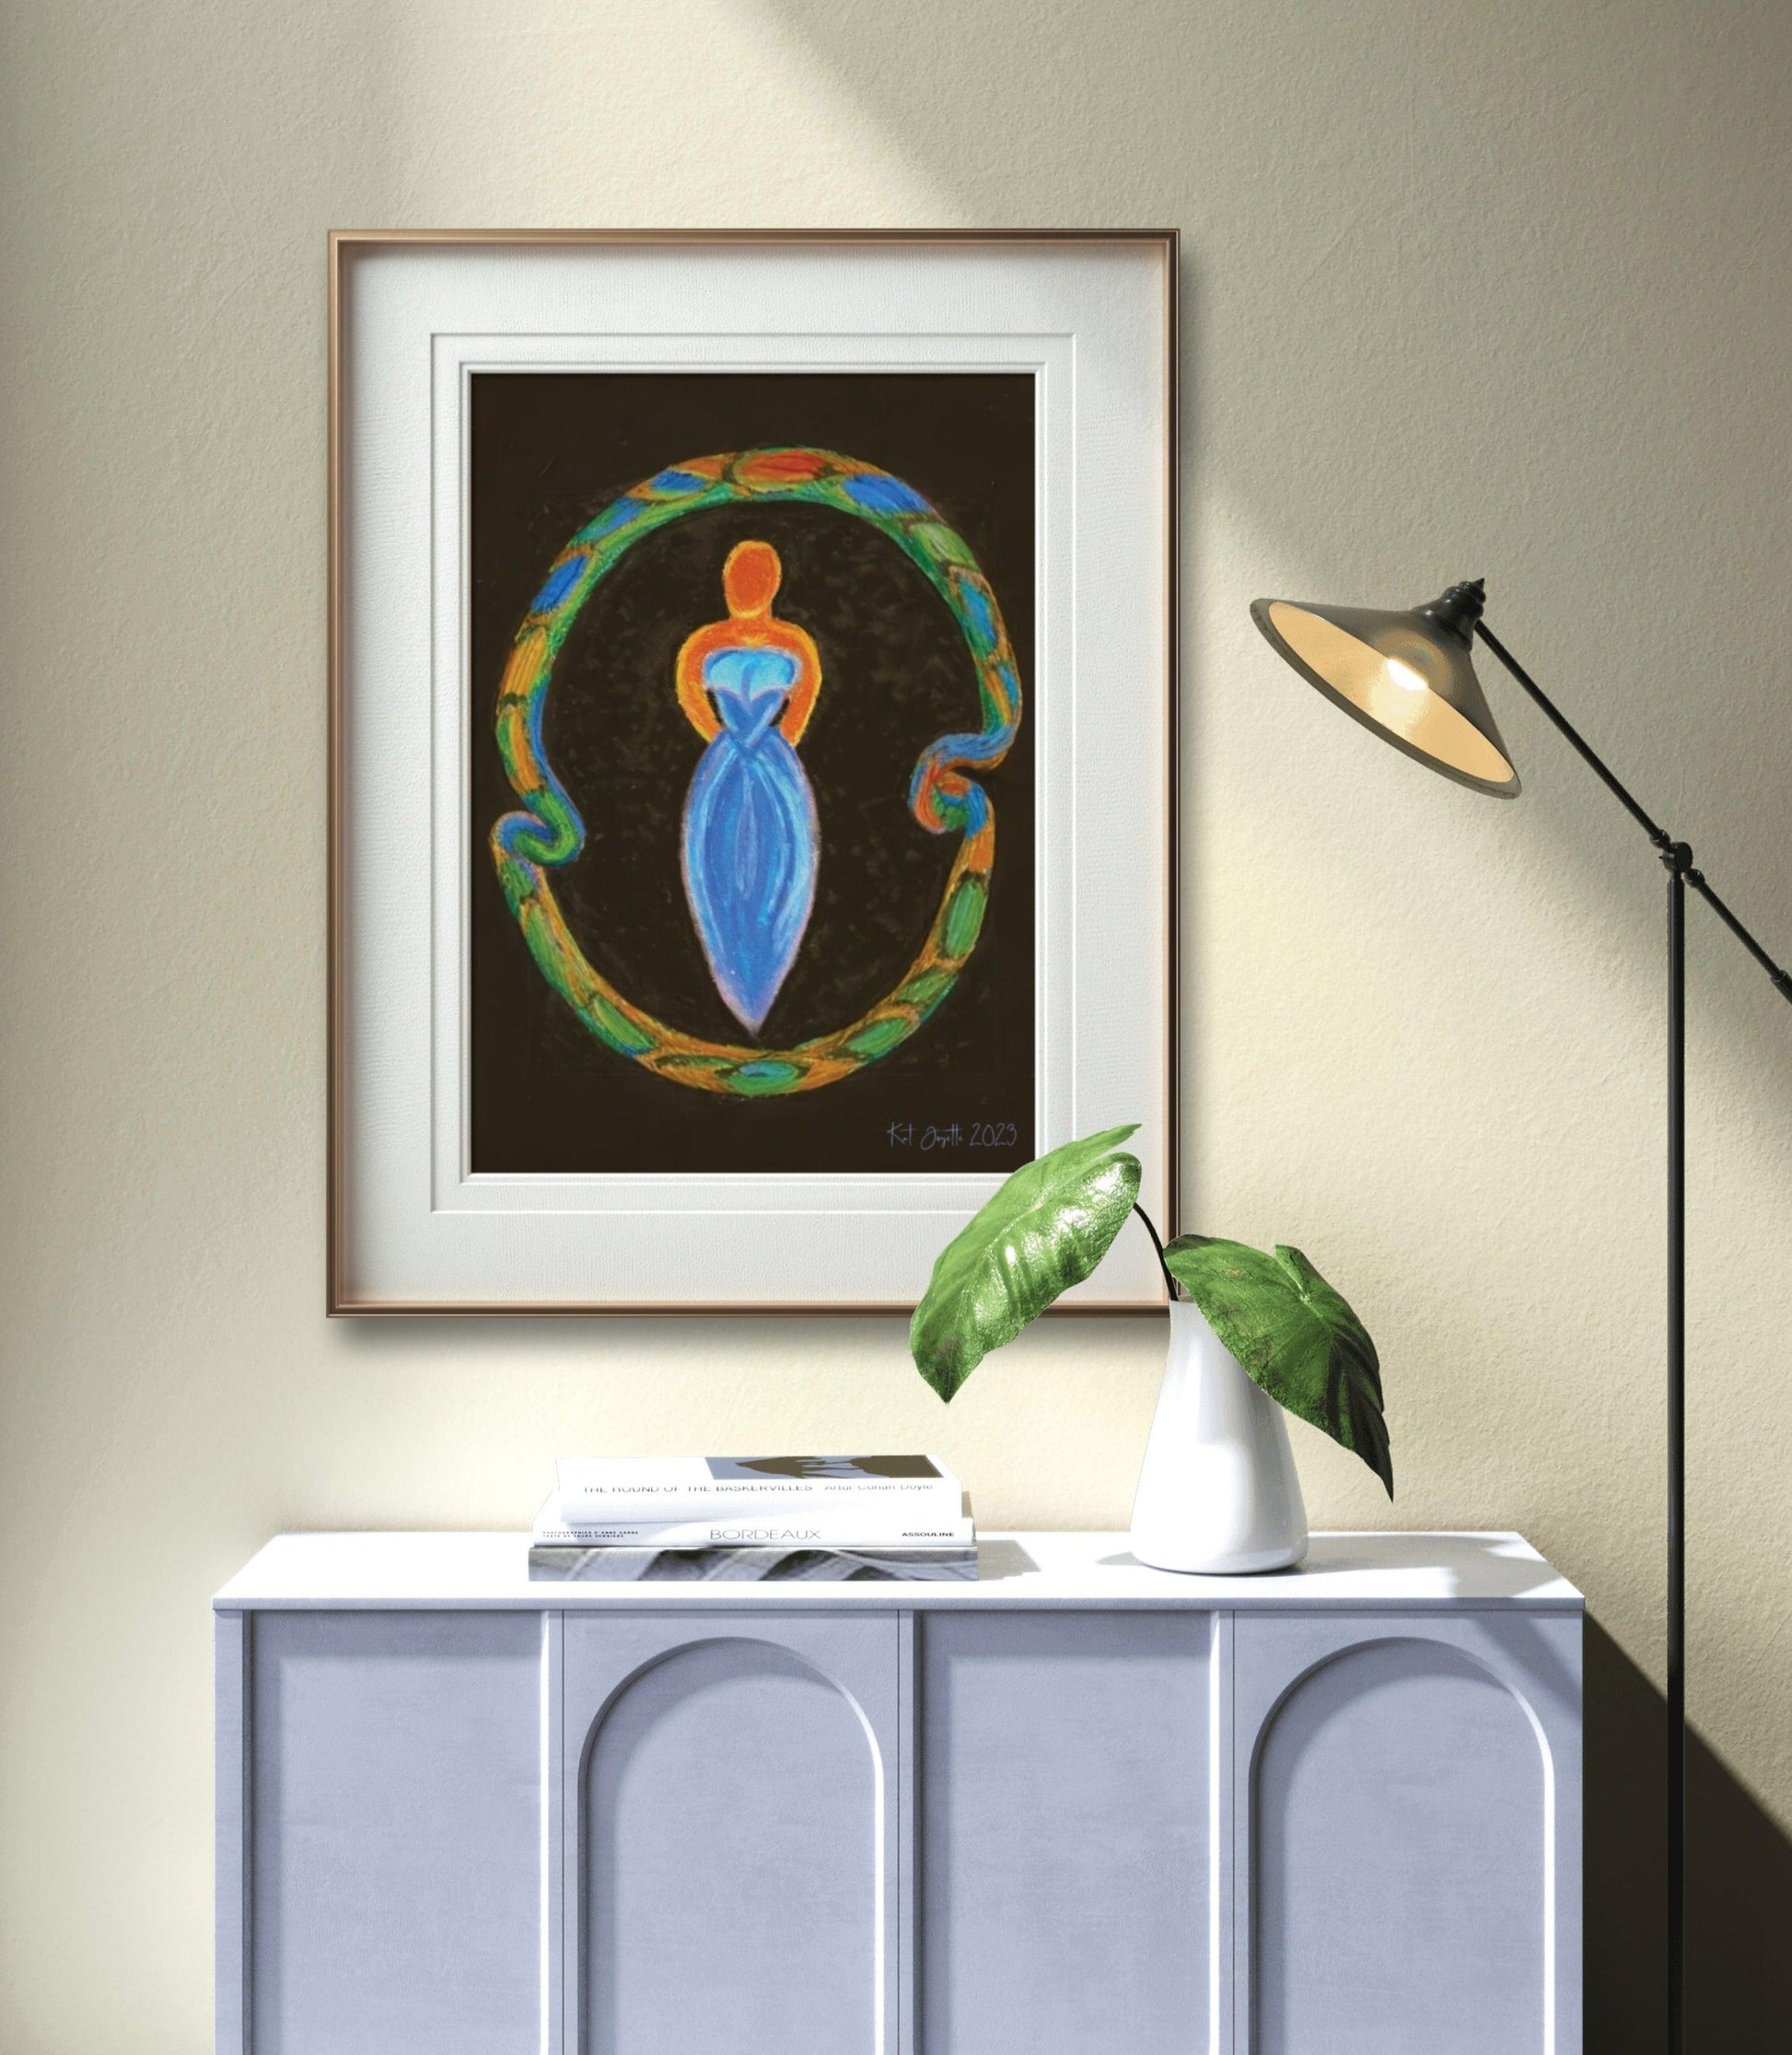 Ouroboros Spiral Goddess by Katherin Joyette, museum quality print, explores ancient symbolism in modern art, available at Tree of Life Art.